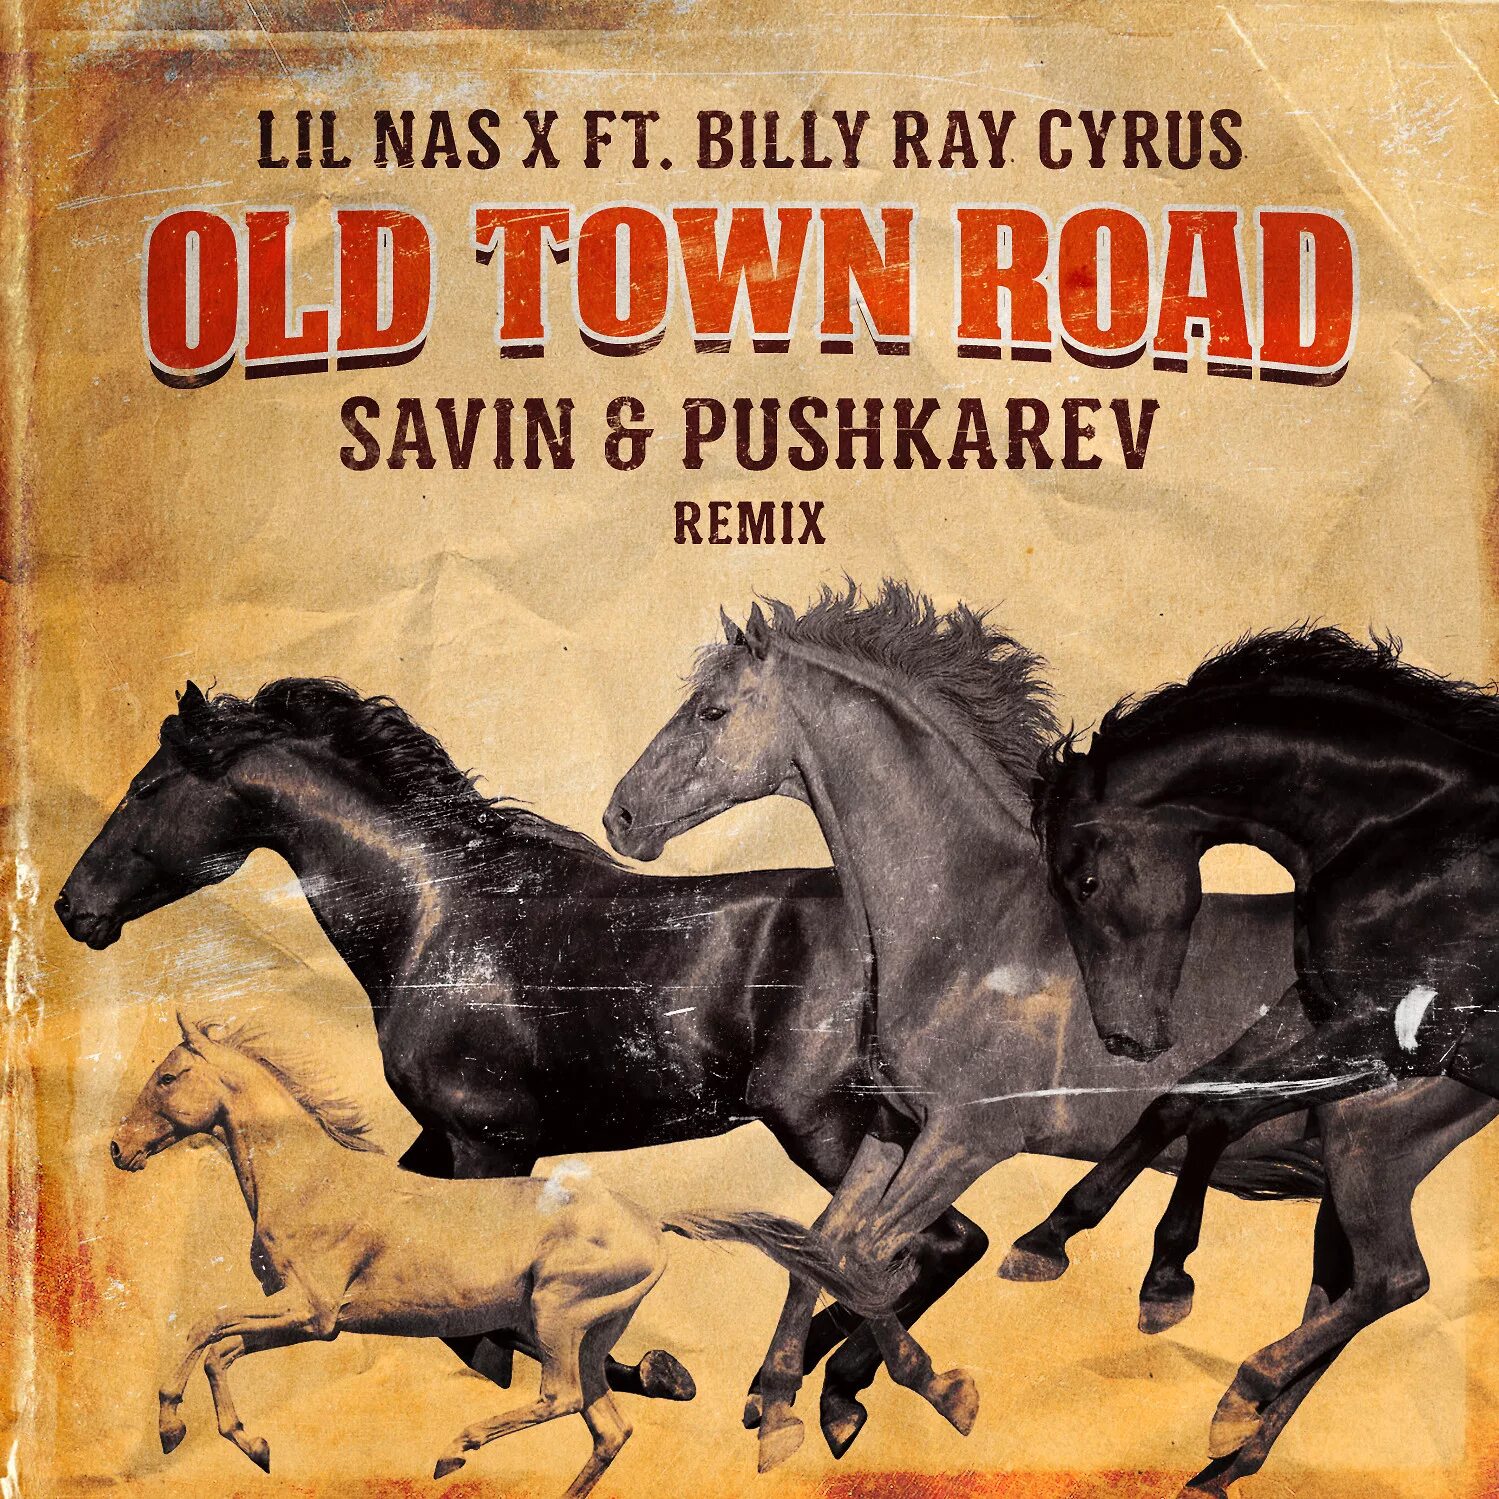 Old town remix. Lil nas x - old Town Road ft. Billy ray Cyrus. Old Town Road Lil nas x Billy ray Cyrus обложка. Lil nas x old Town Road обложка.